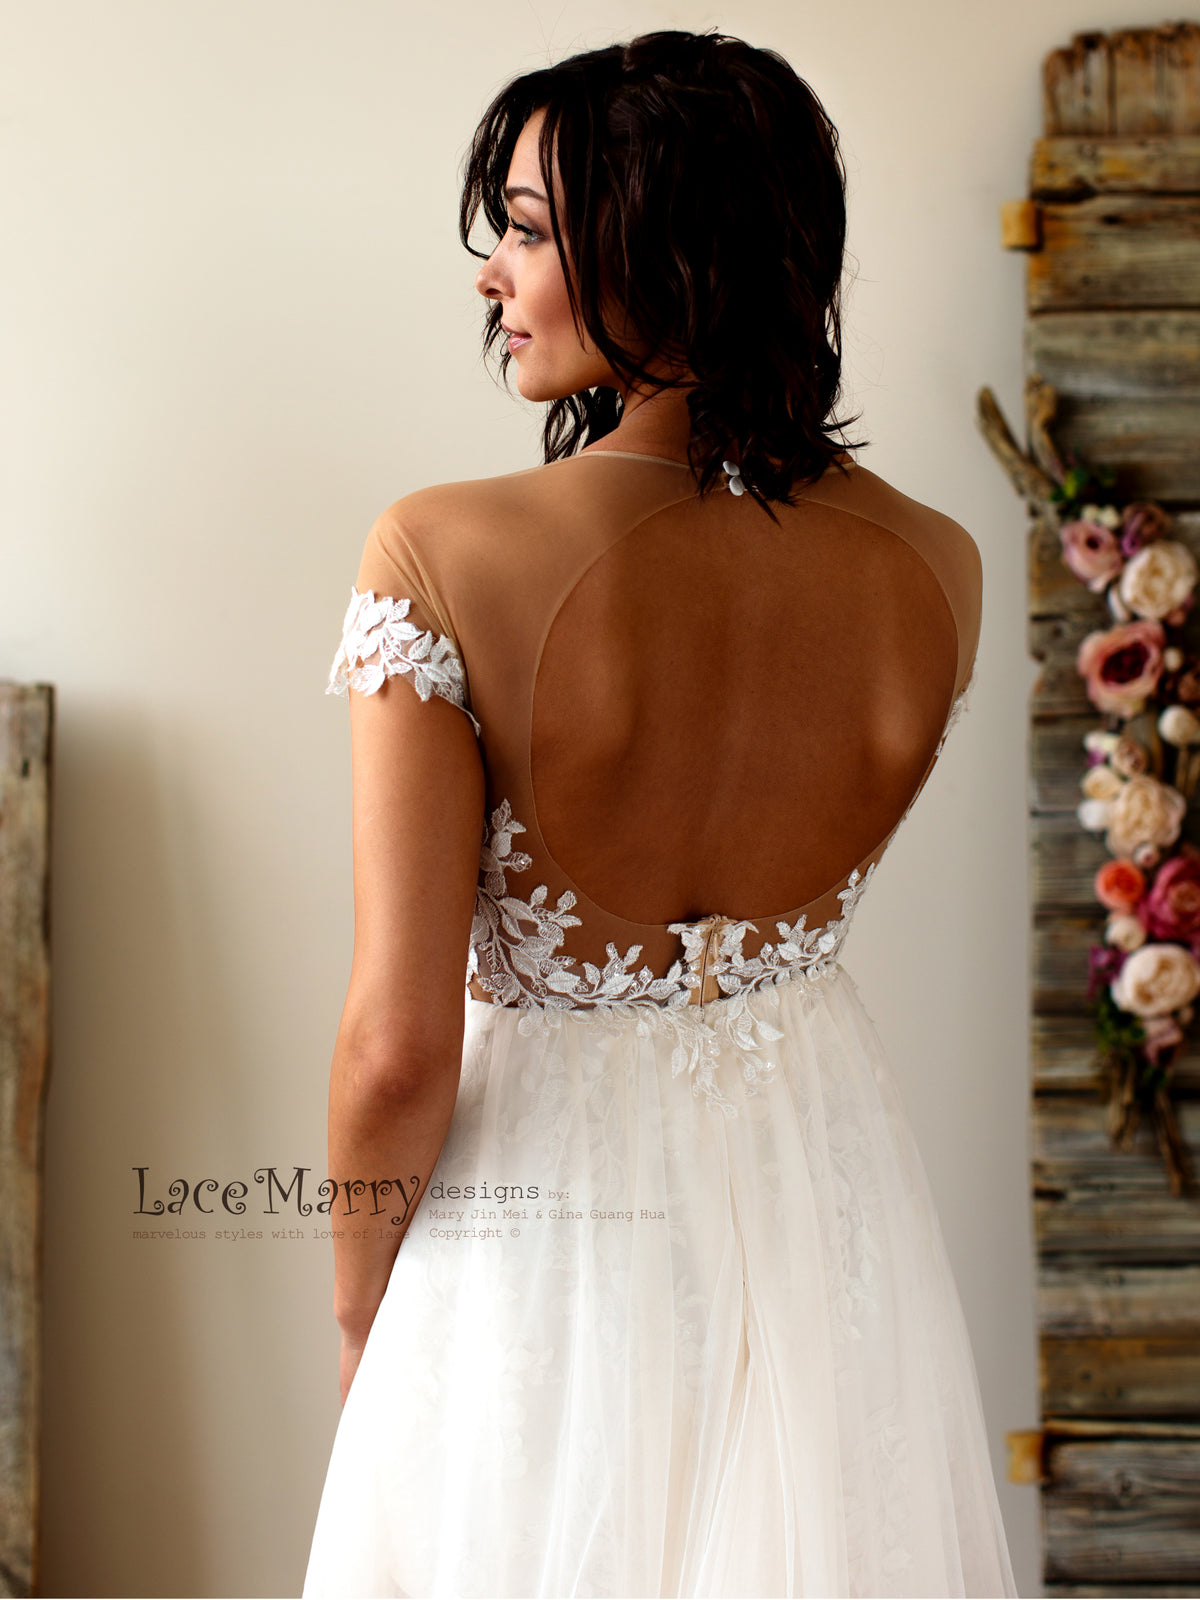 Nude Lace Wedding Dress with Illusion Style